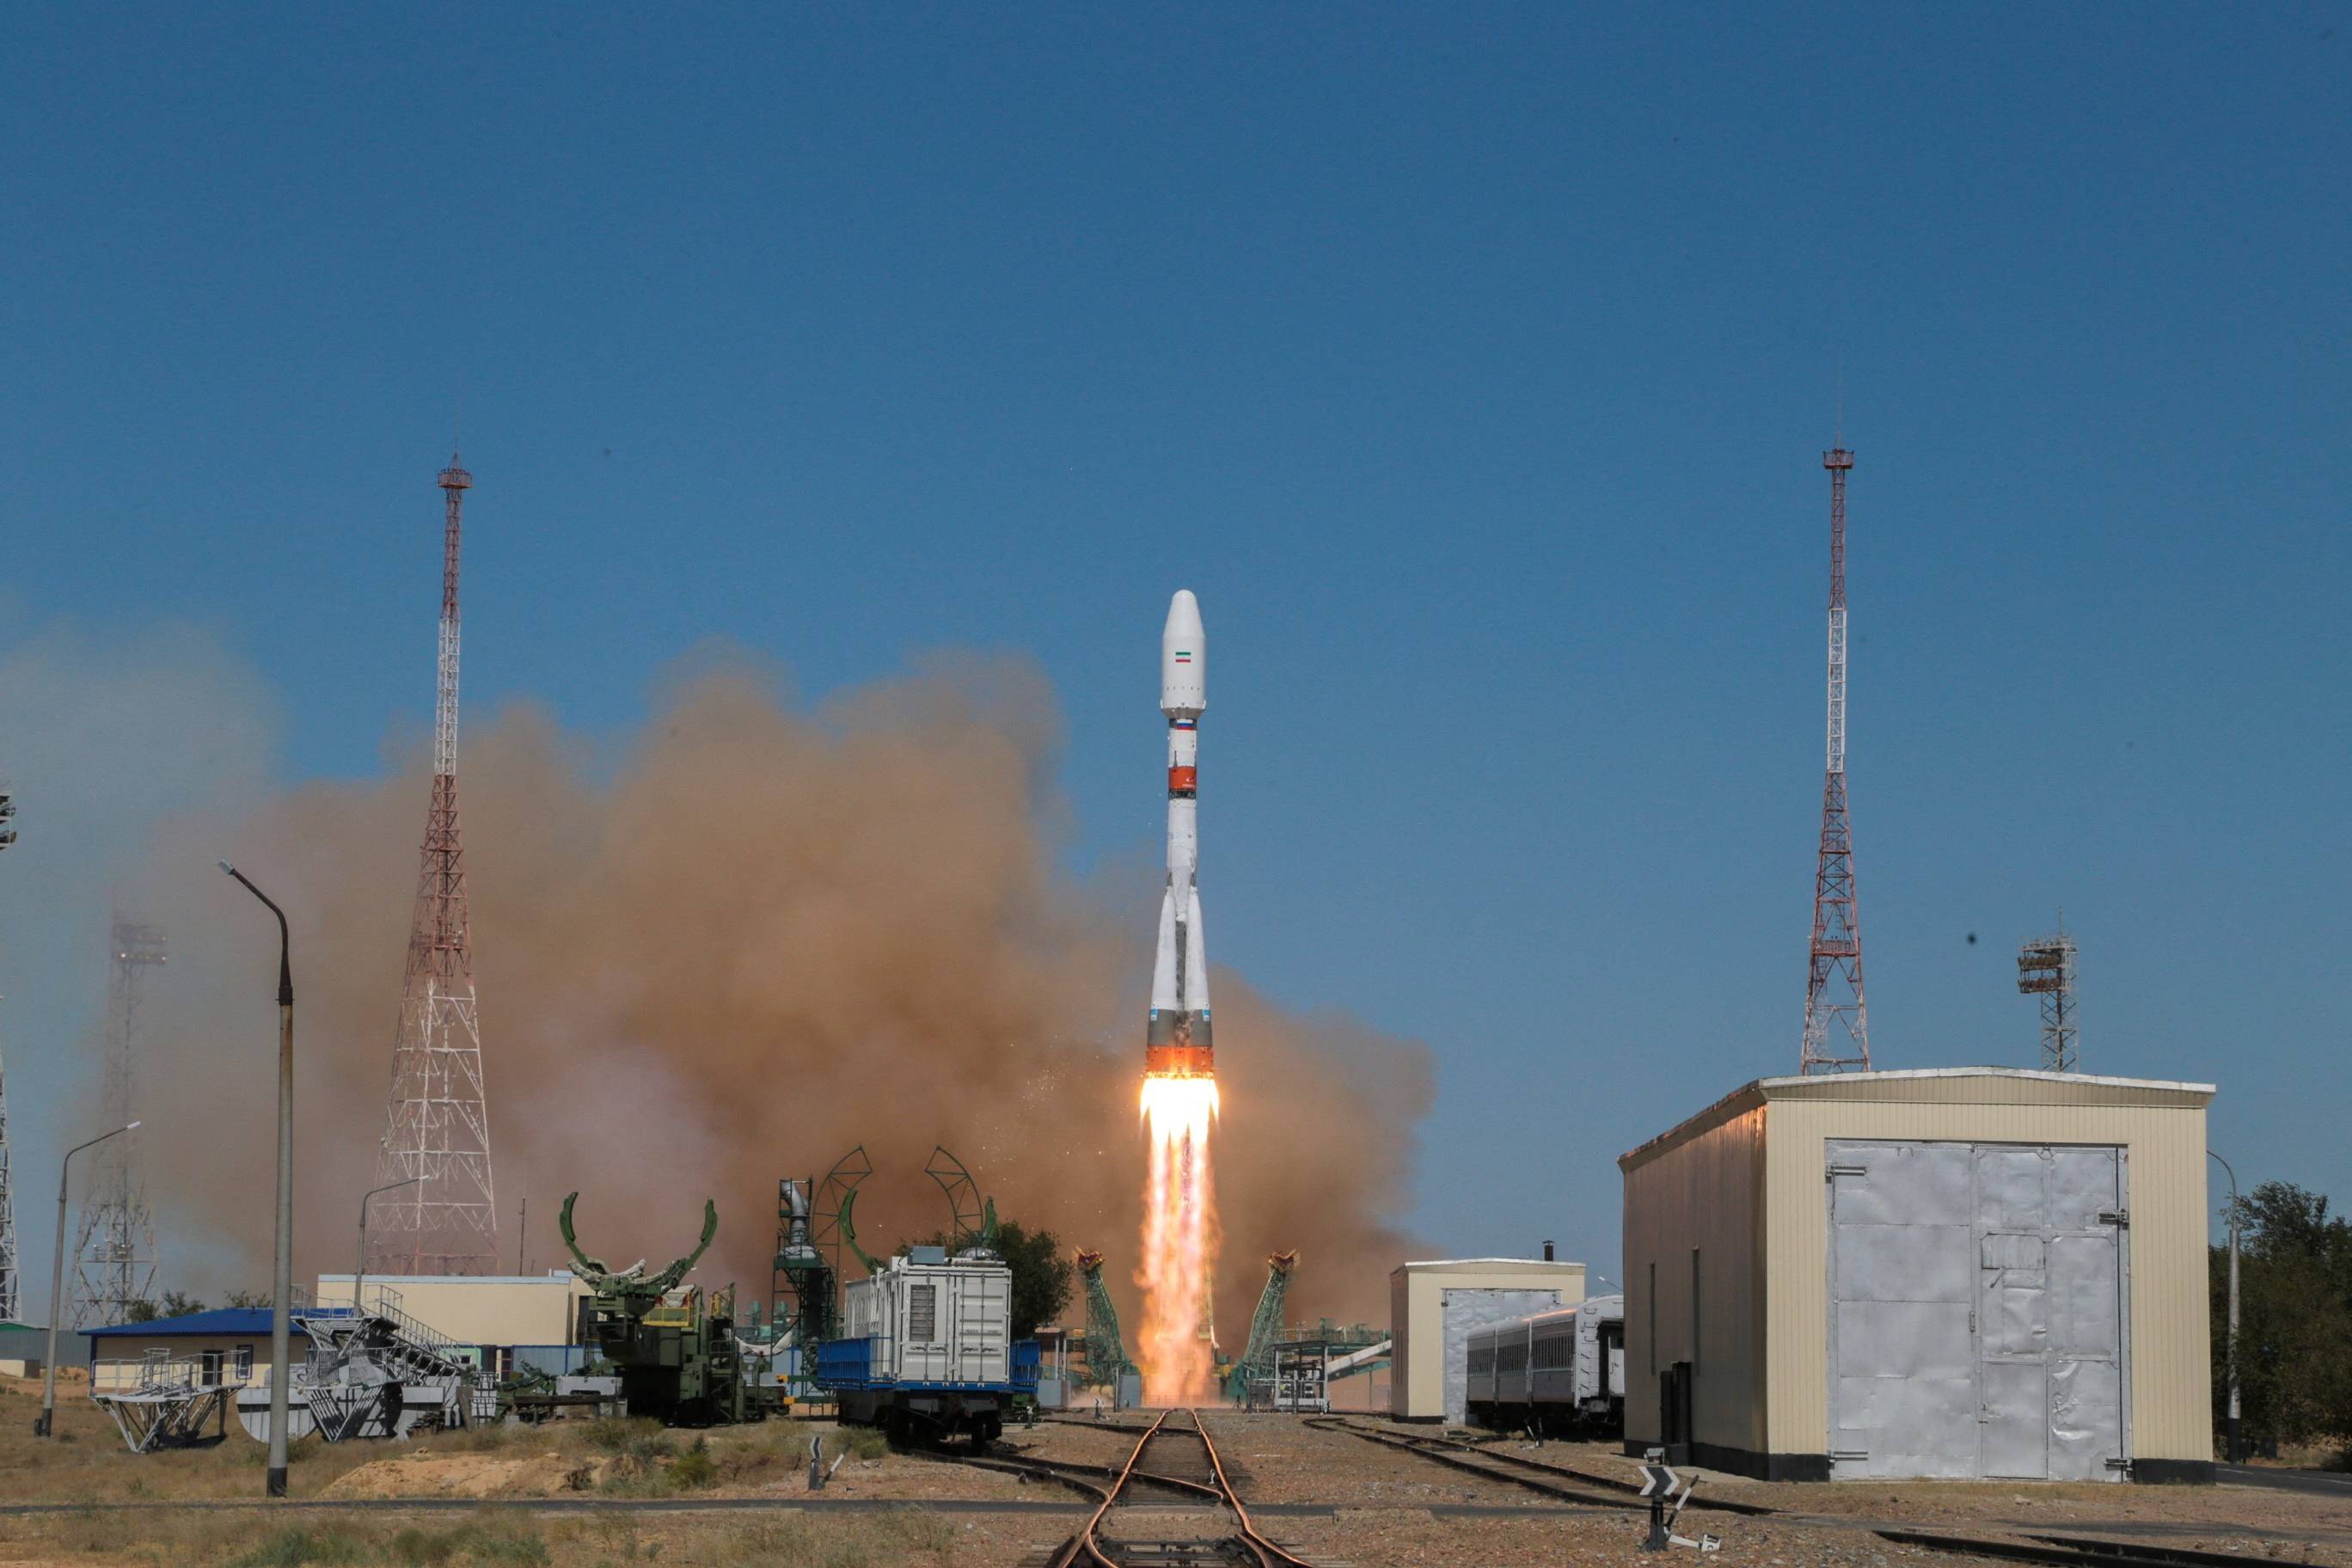 A Russian Soyuz2.1b rocket launches a satellite into orbit from the Baikonur Cosmodrome in Kazakhstan in August. | ROSCOSMOS / VIA REUTERS  